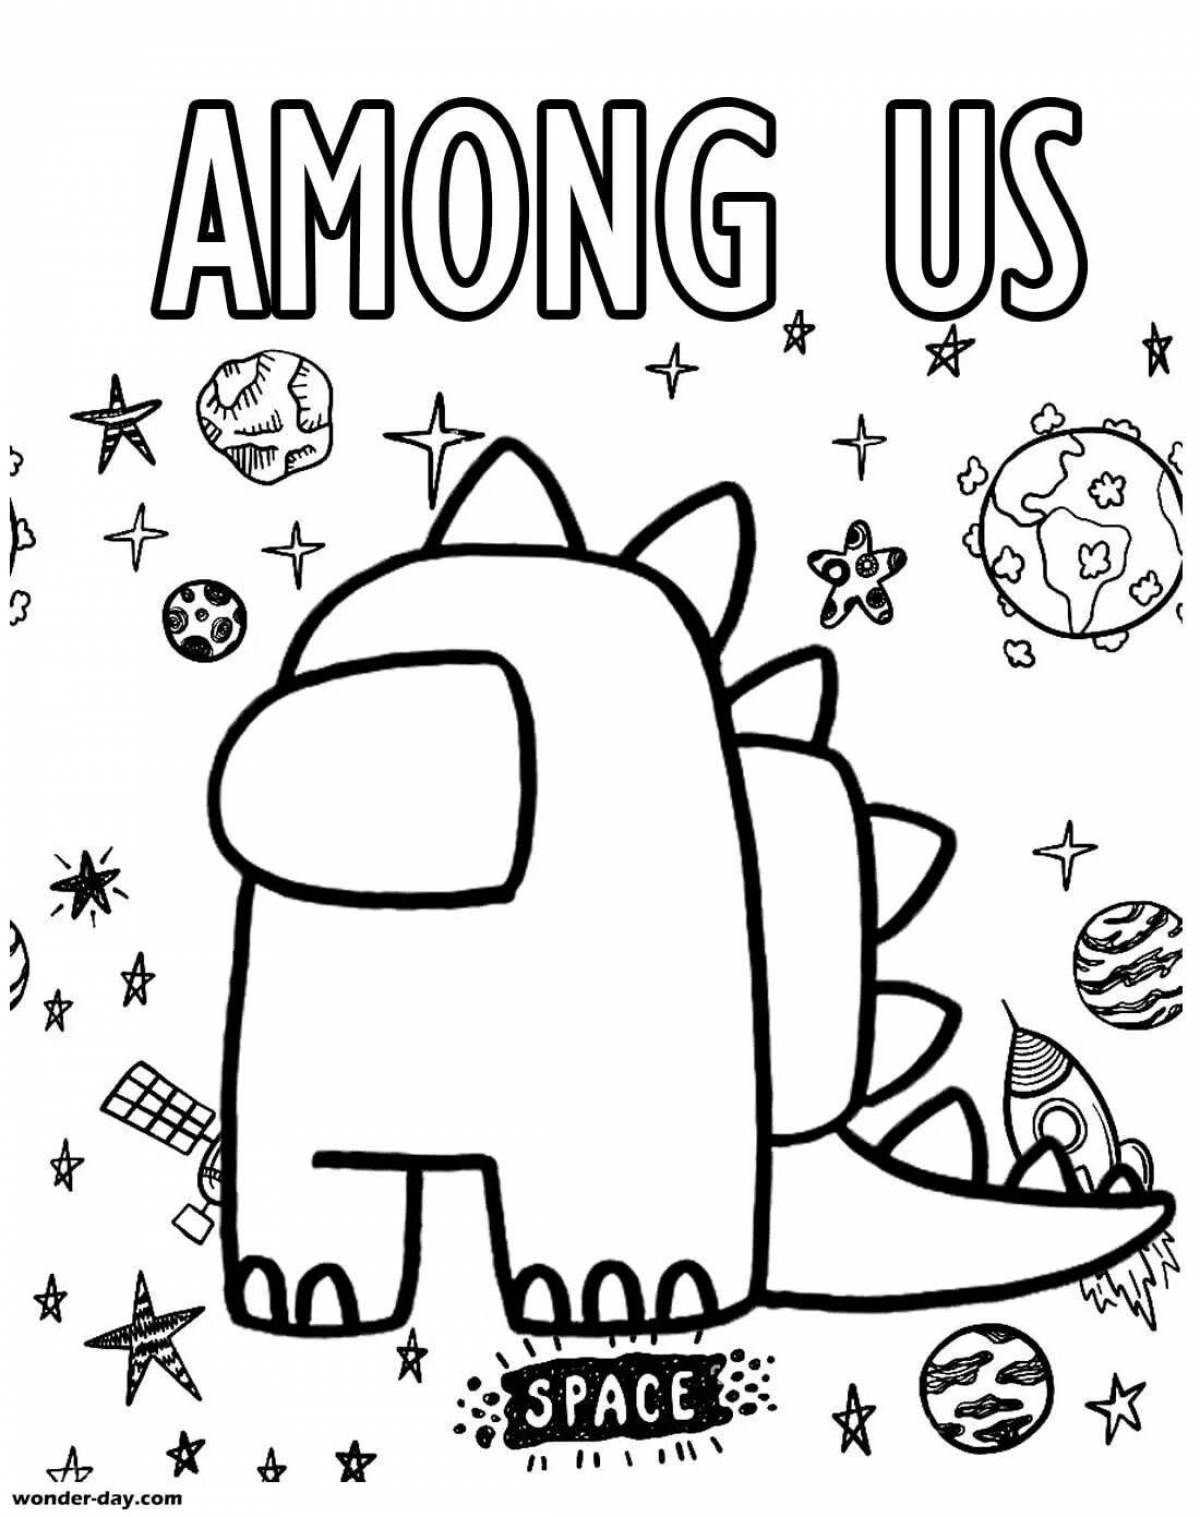 Fascinating Among Us coloring page